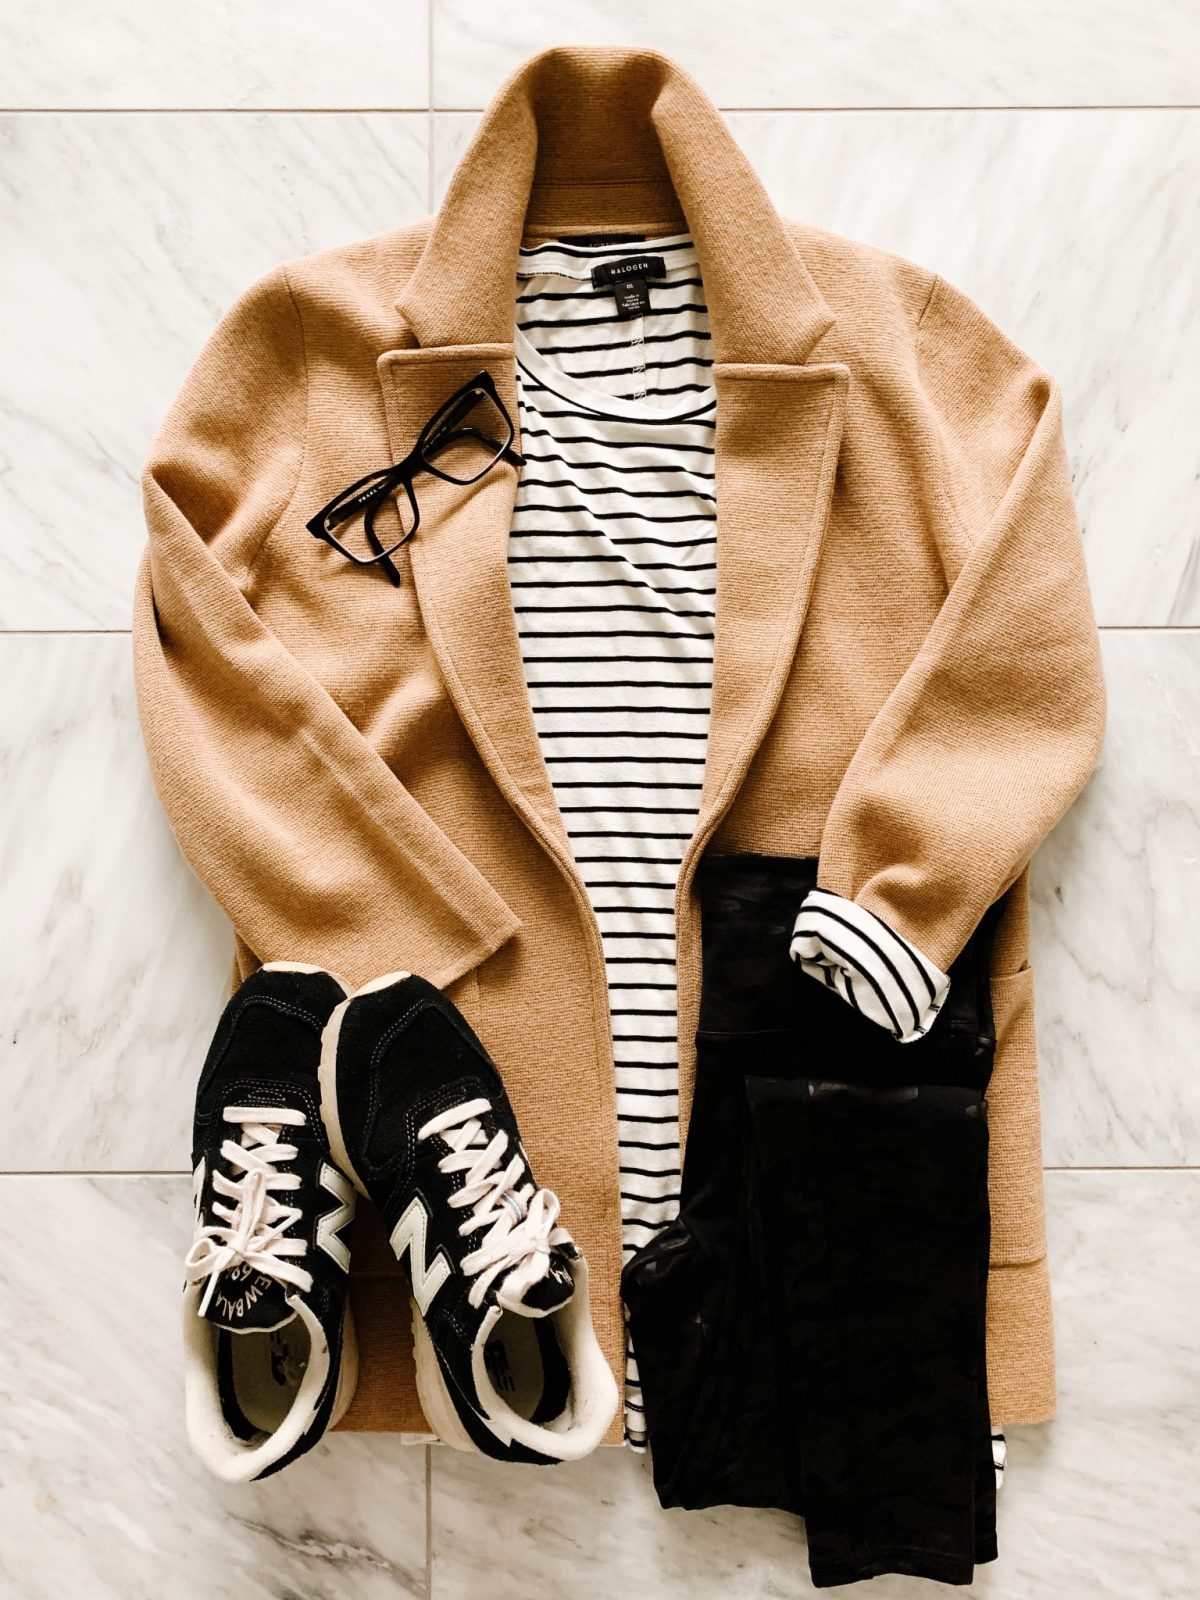 J. Crew sweater blazer styled with a striped long sleeve tee and black leggings